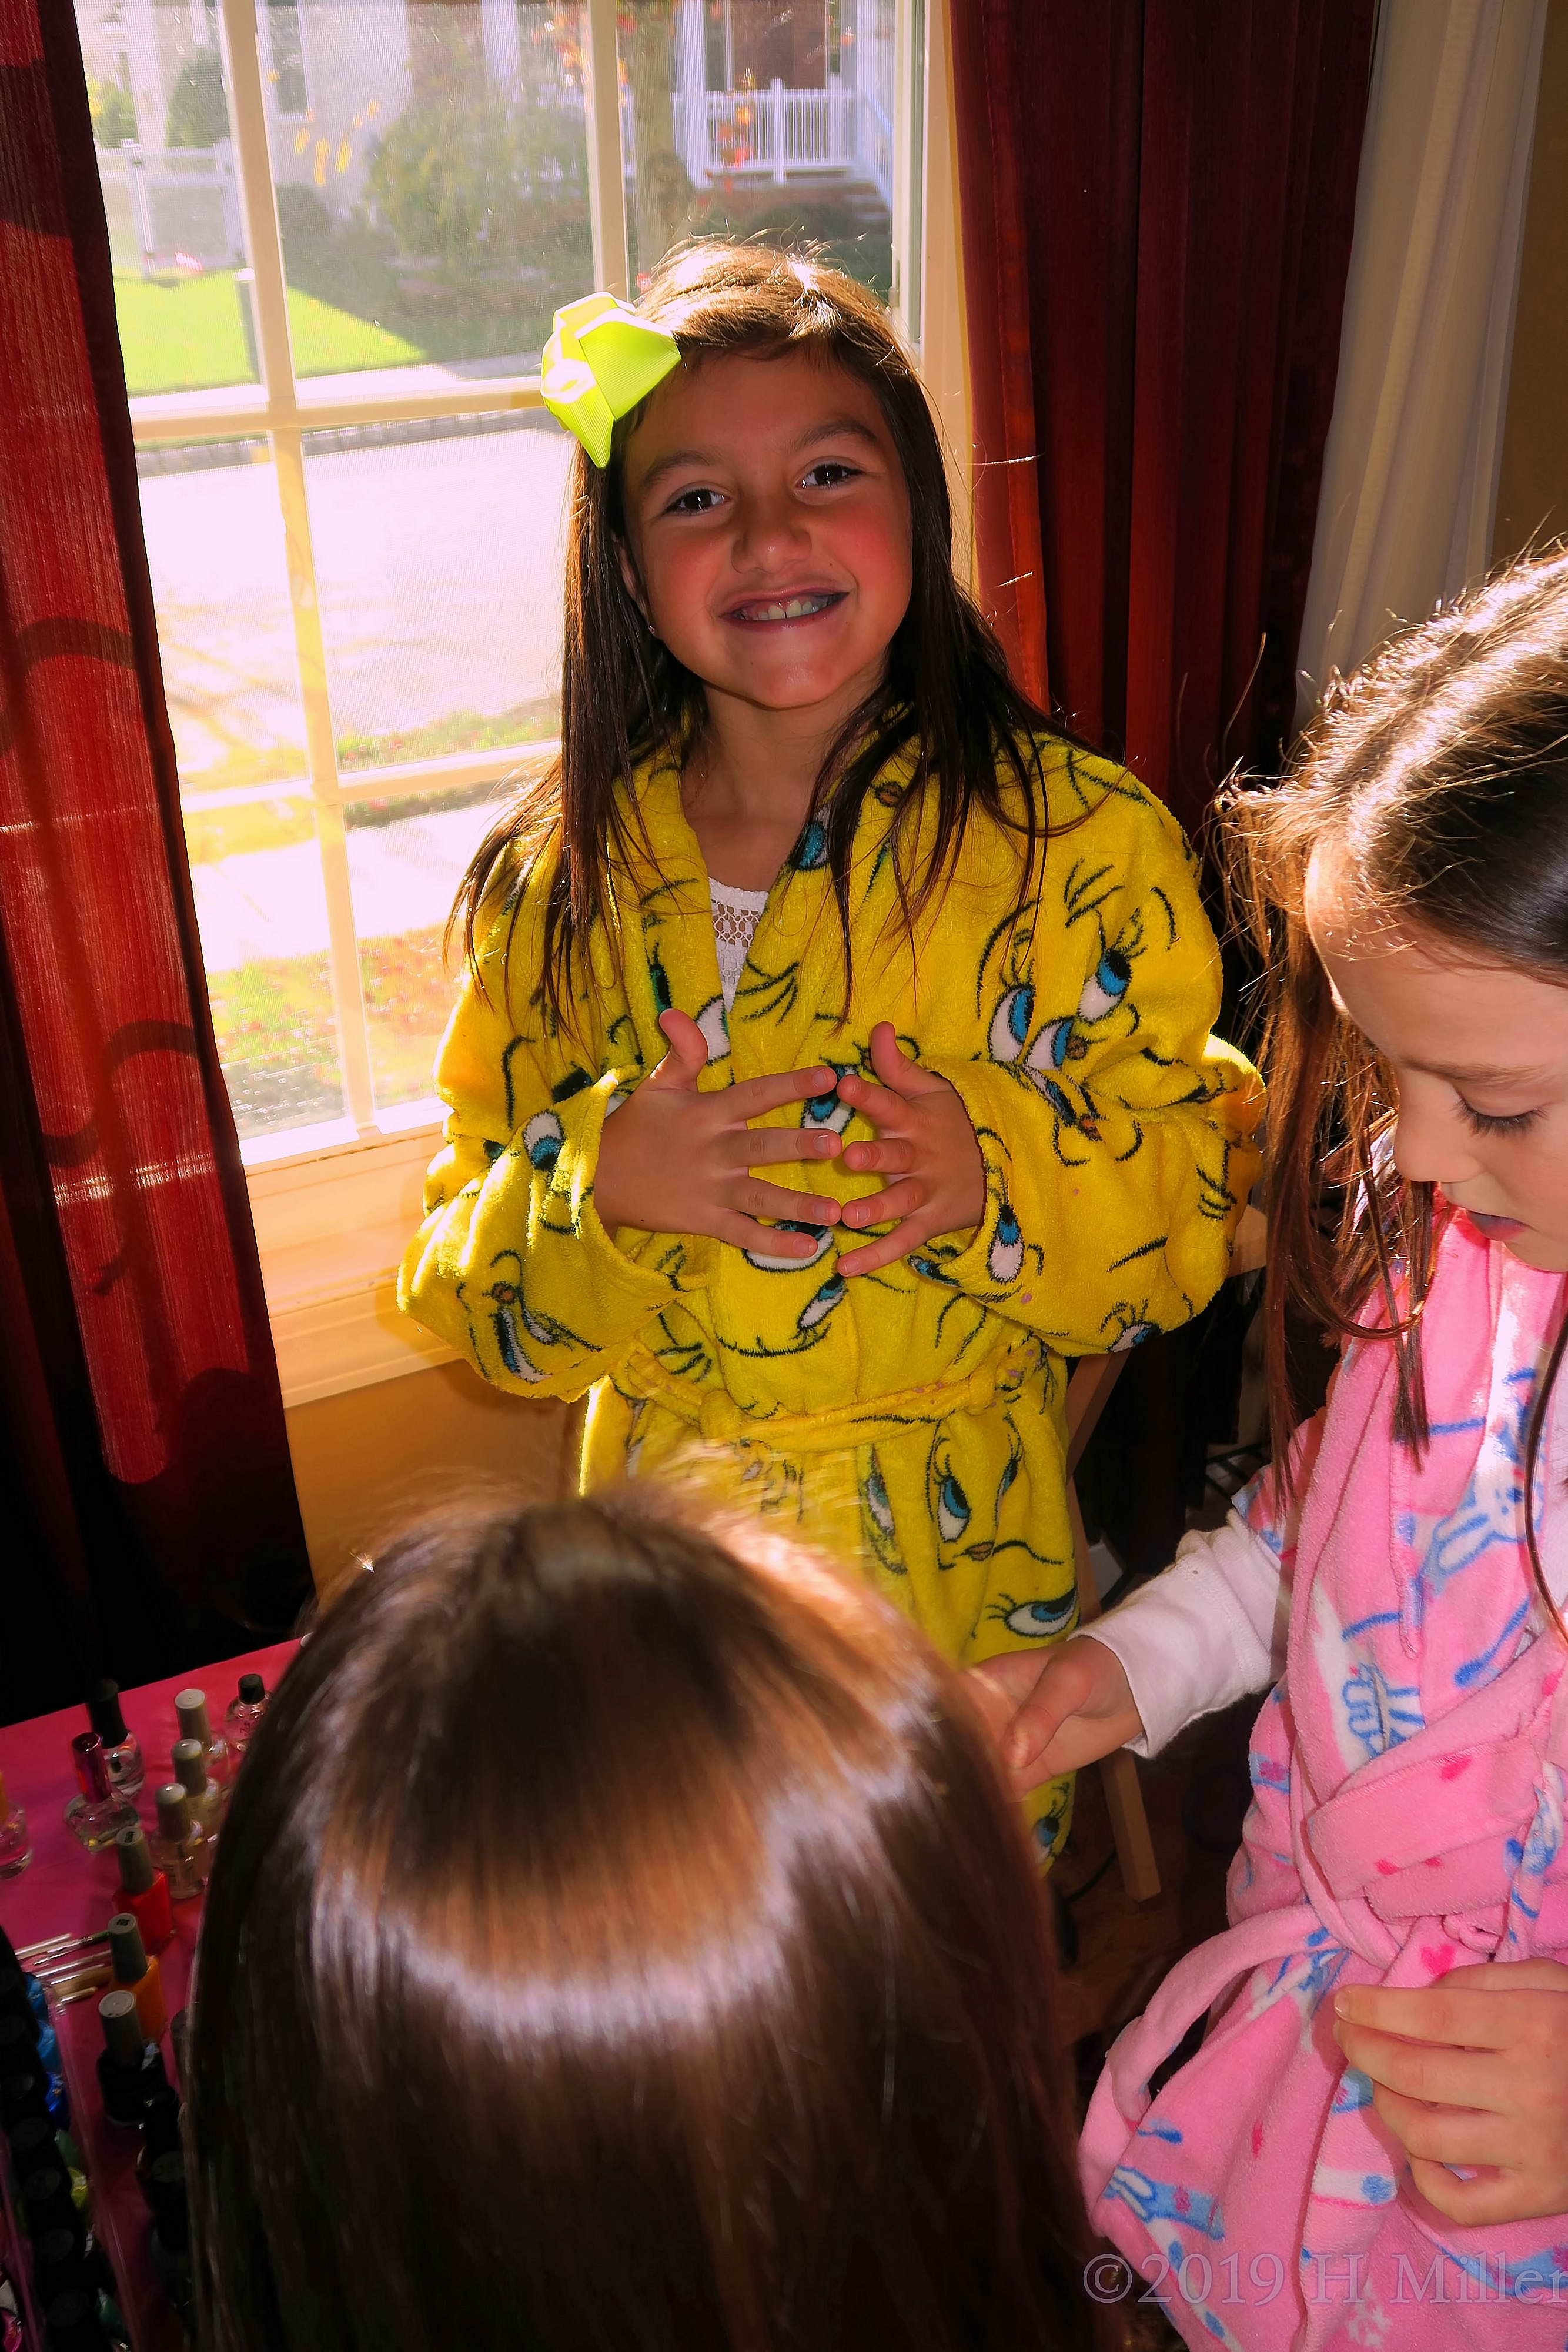 She's Got Sunshine! Kids Party Guest Poses By Window In Yellow Spa Robe! 4